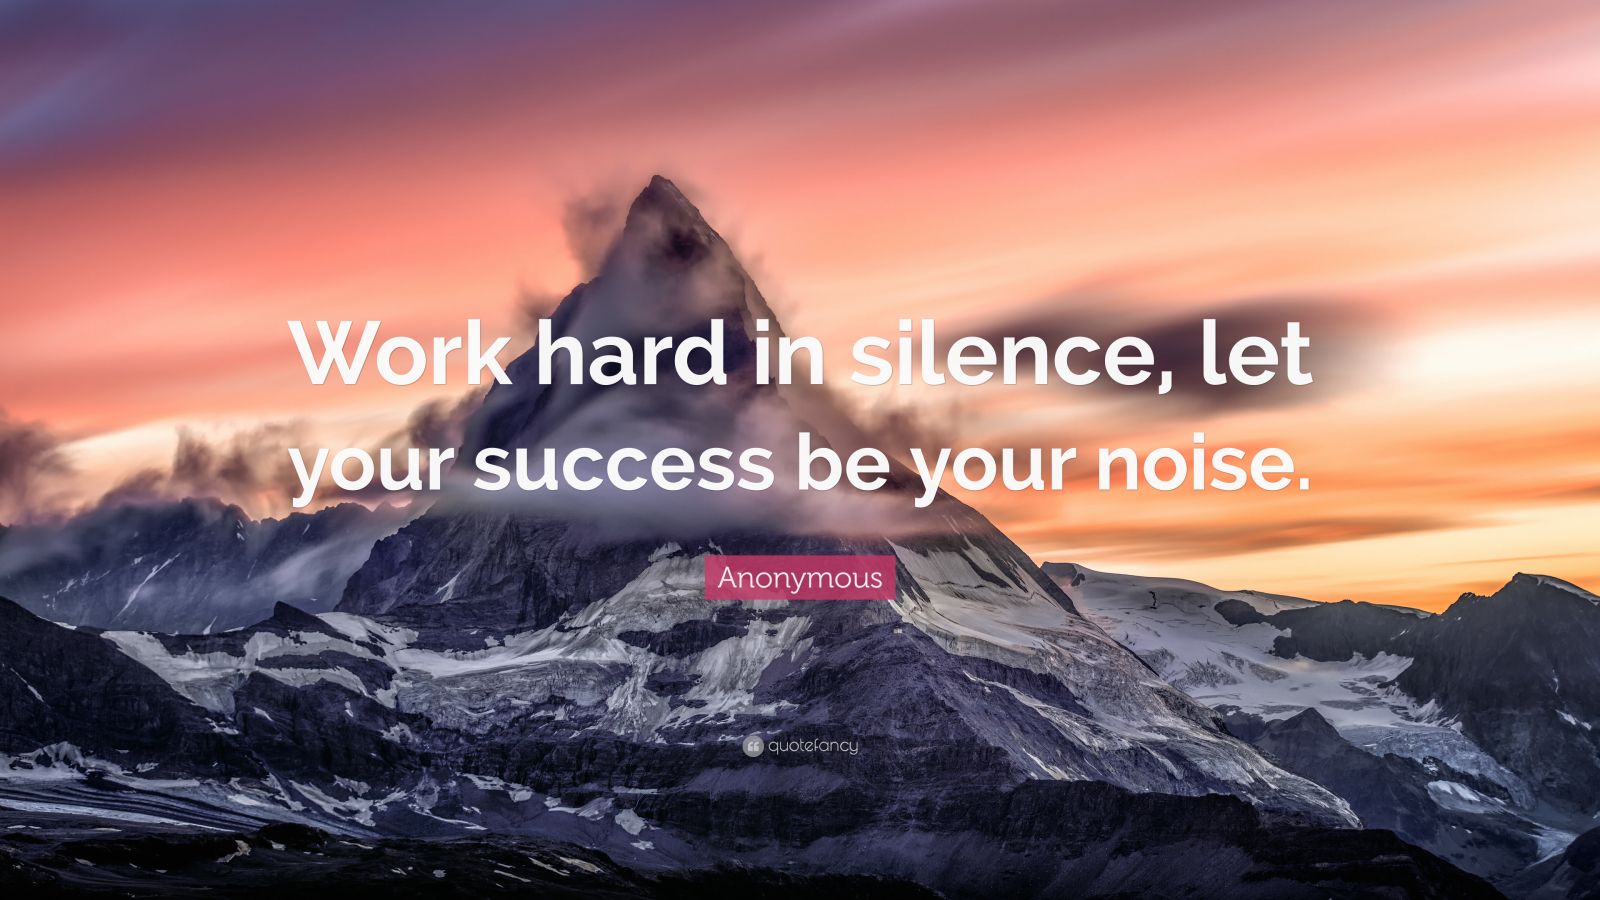 frank ocean quote: "work hard in silence, let your success be